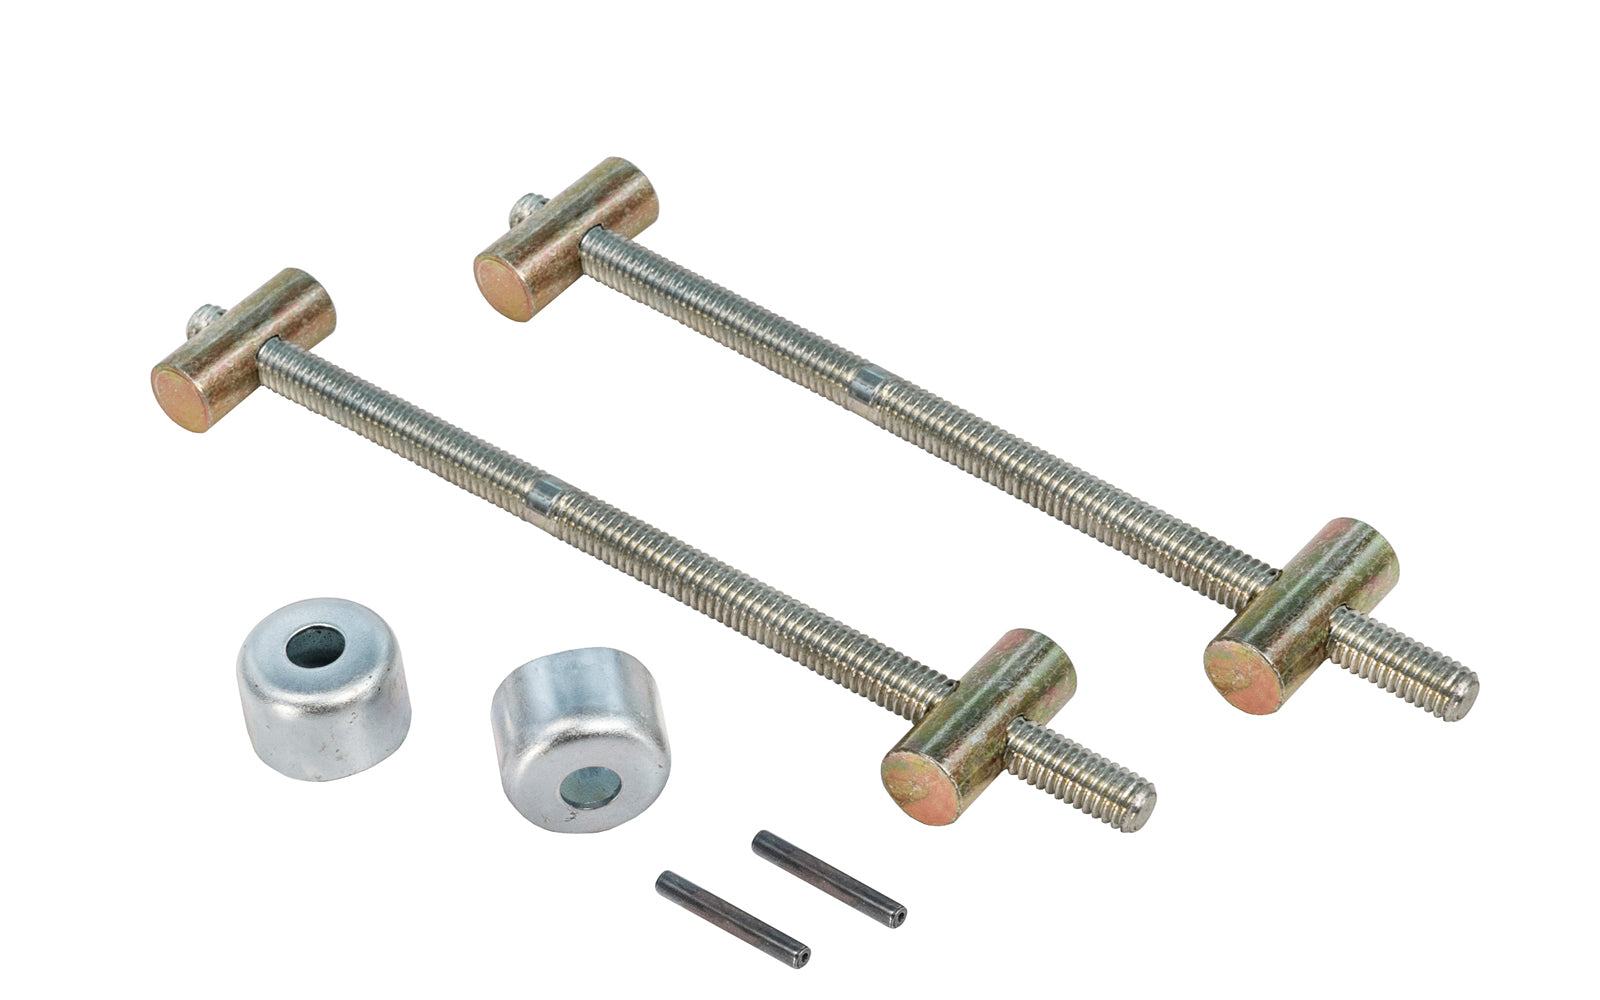 Build your own adjustable handscrew clamp with this kit. This kit is designed for 14" Jaw Length Handscrew Clamps. Spindles & swivel nuts are of cold drawn carbon steel & the threads have double leads for rapid operation & close tolerances. All metal parts are treated to prevent rust. Model 00140 ~ Made in USA ~ 099687001400